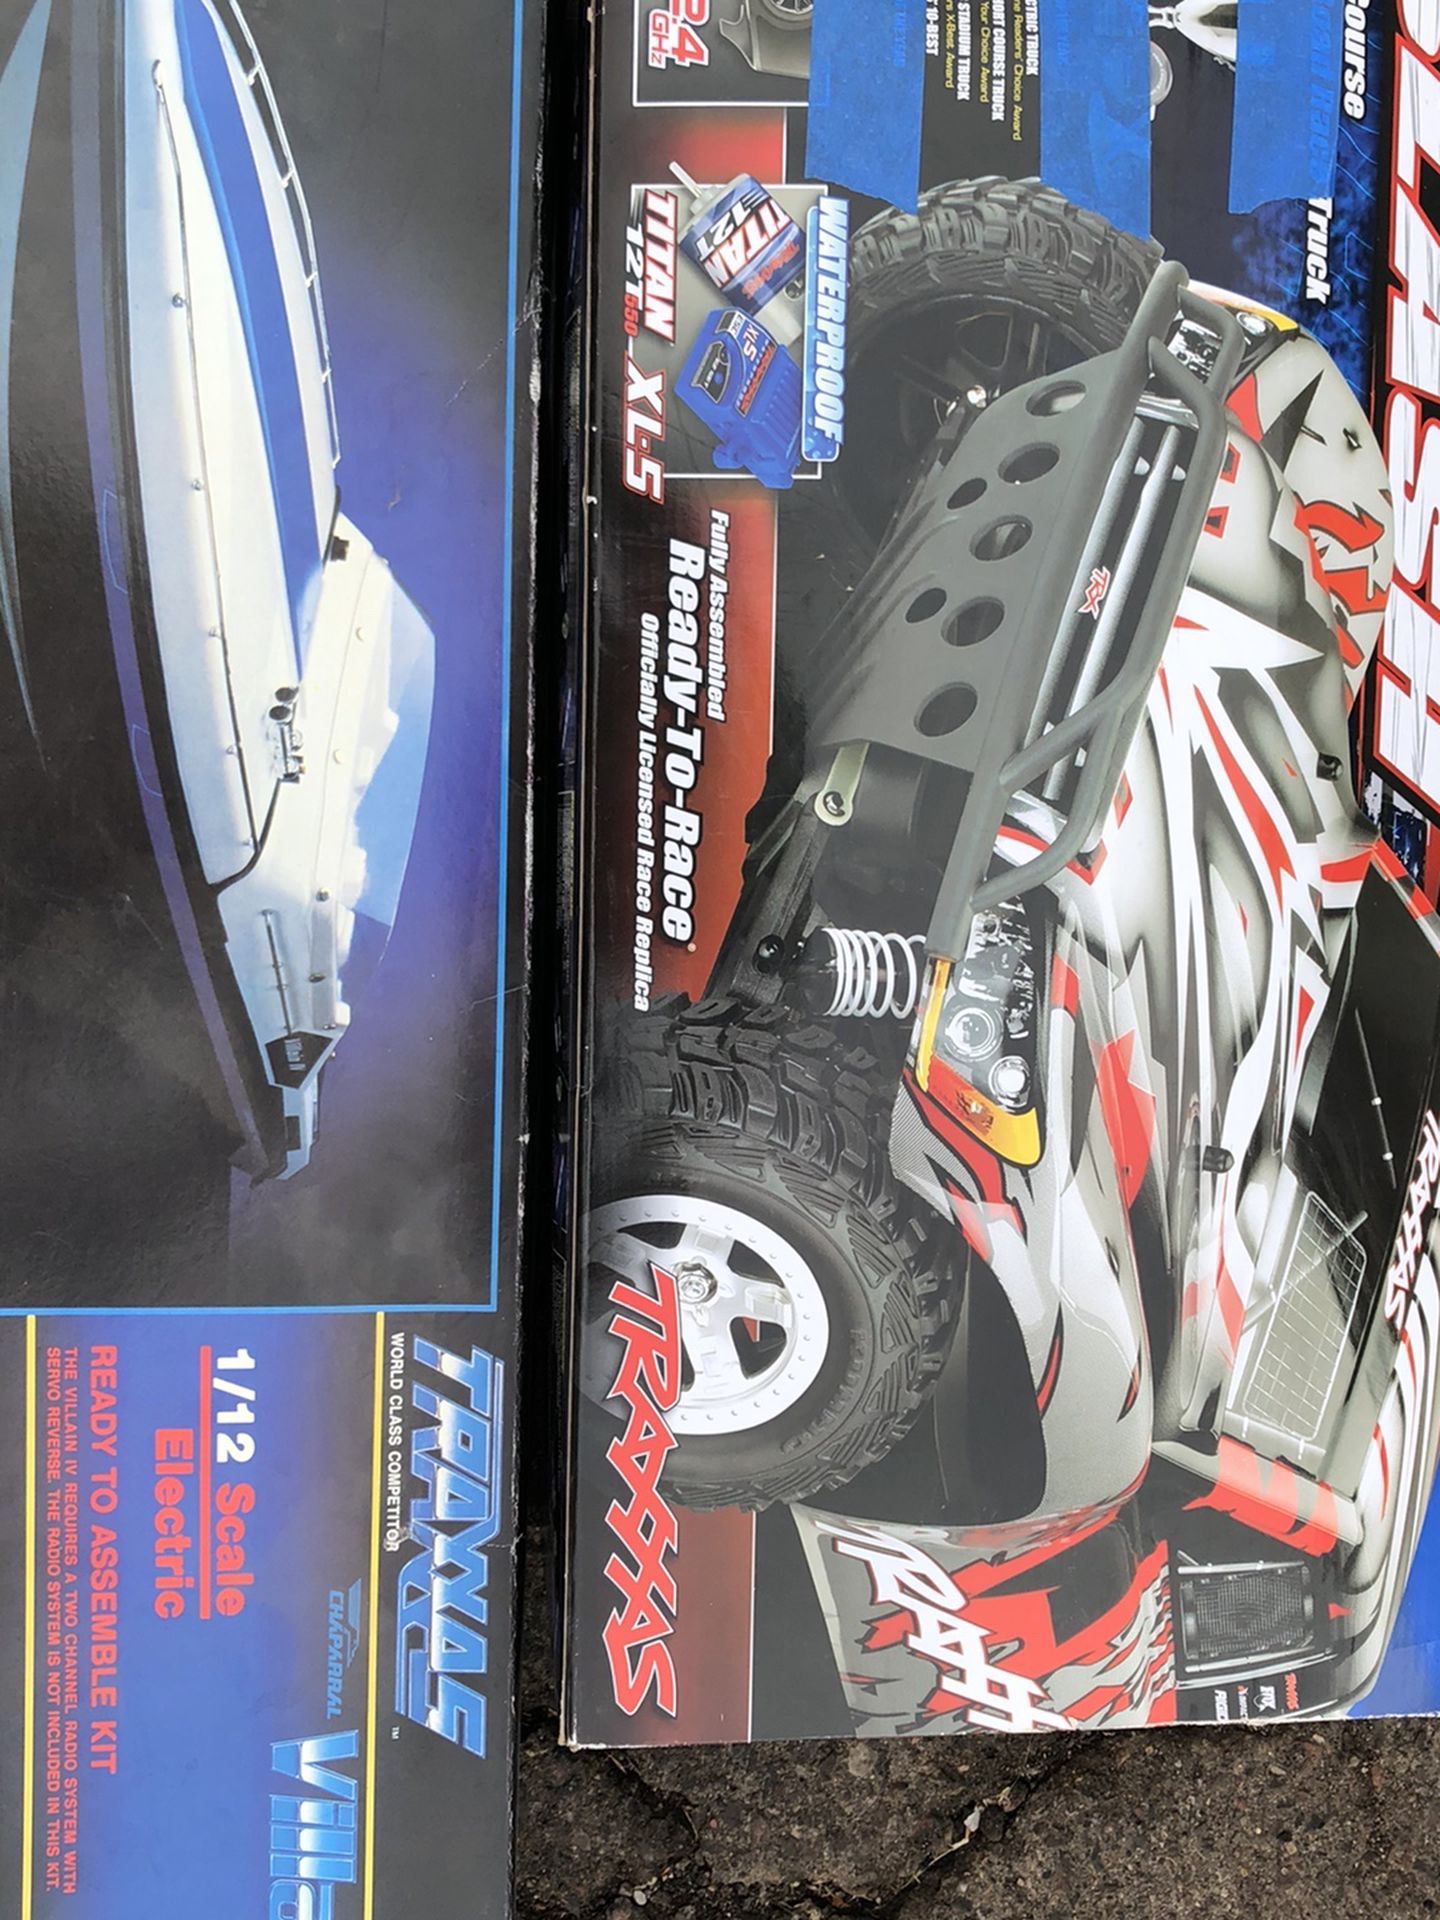 Traxxas Rc Truck And Rc Boat